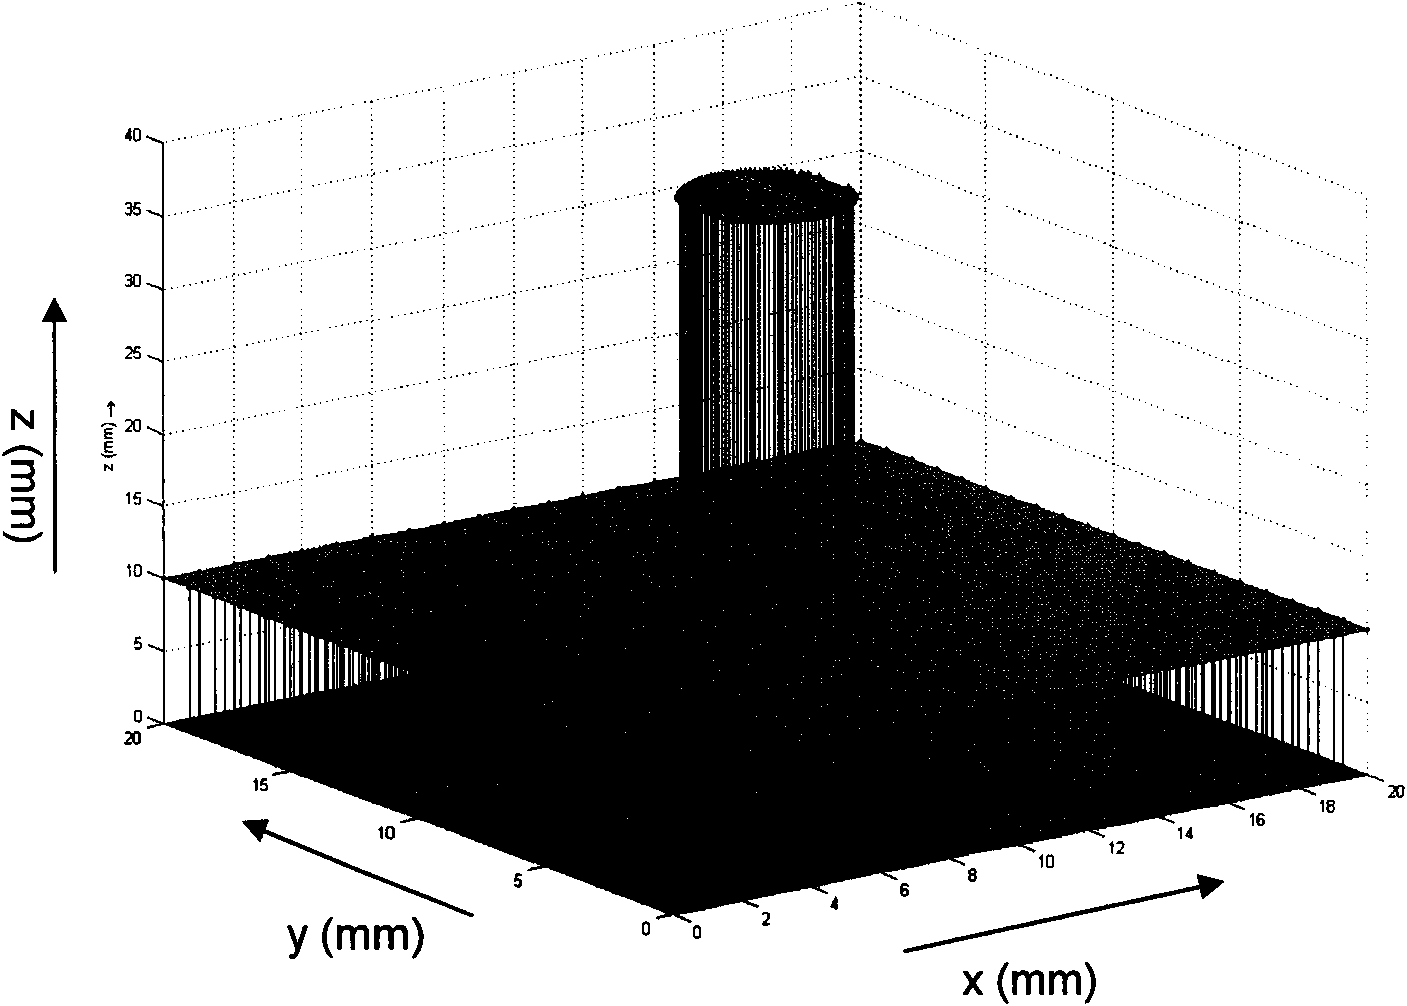 Ultrasonic frequency spectrum offset parameter imaging method used for characterization of spongy bone microstructure